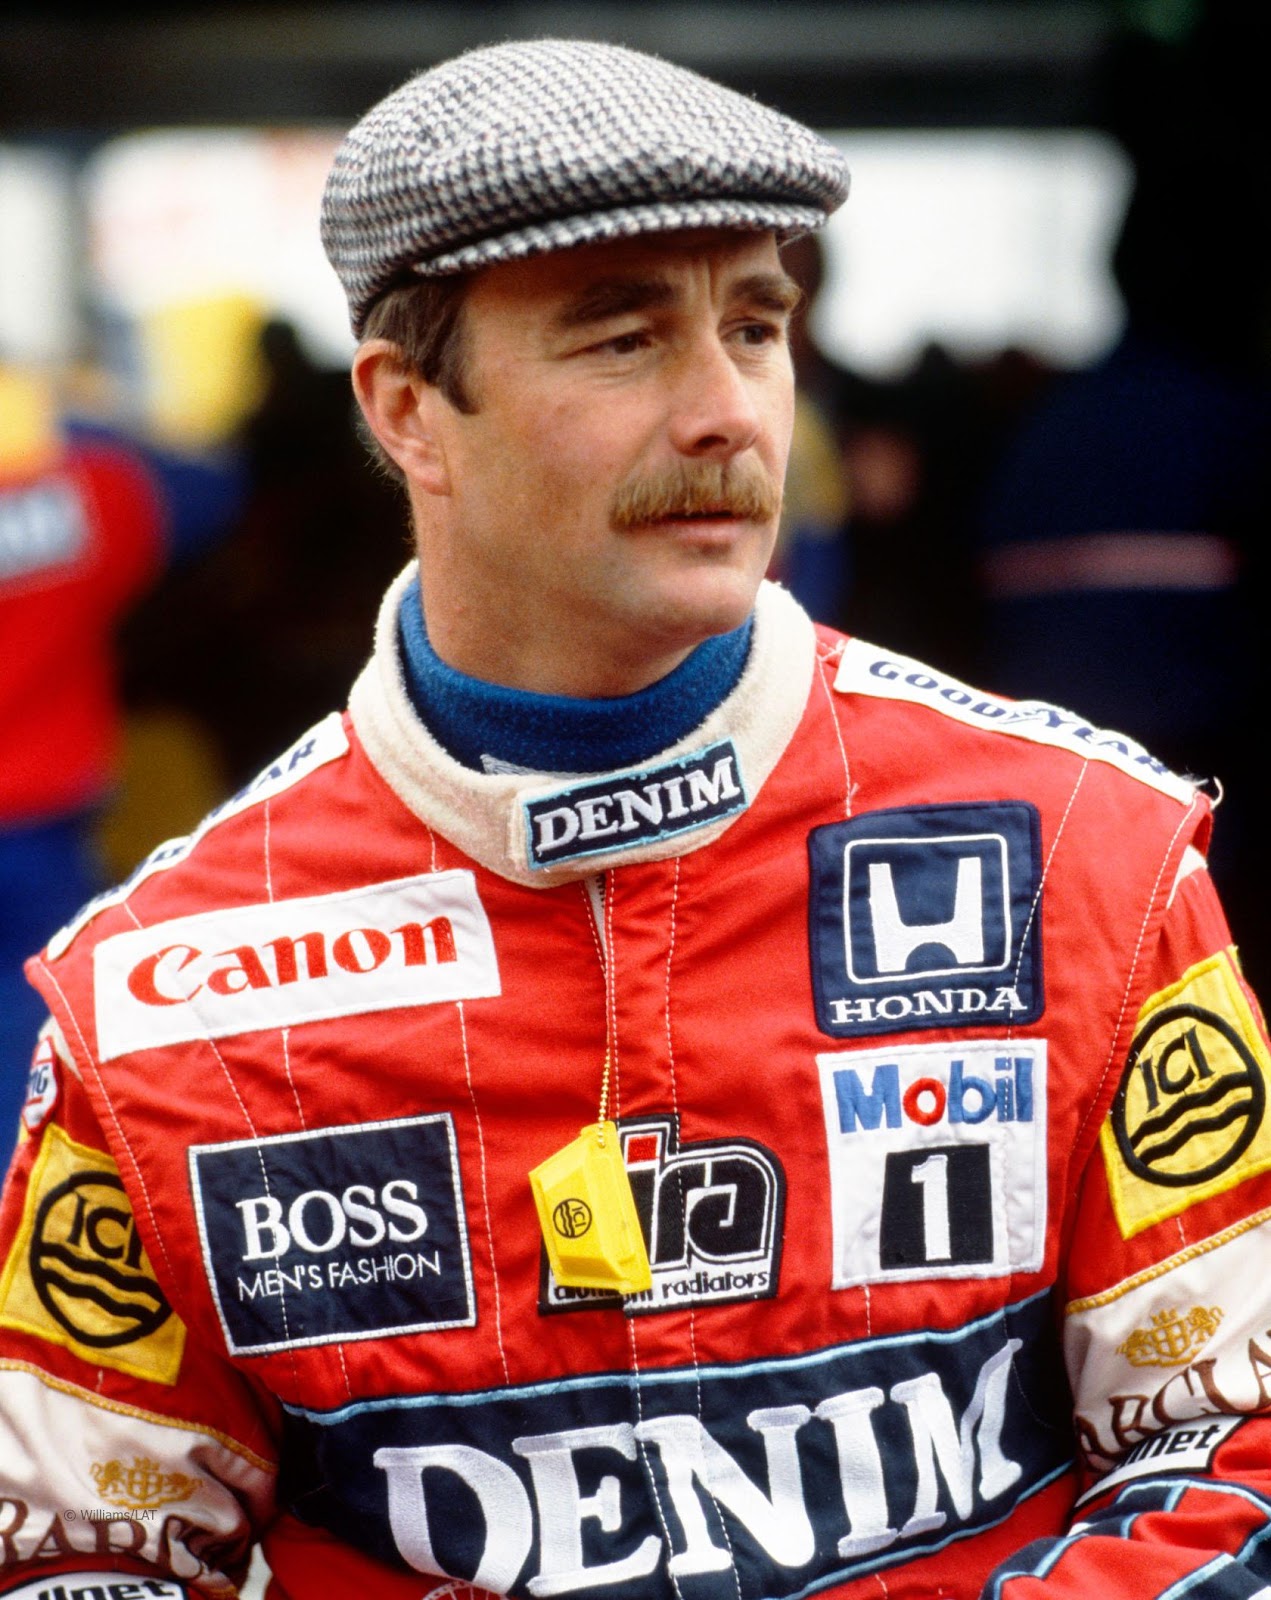 Nigel Mansell at Spa in 1987.